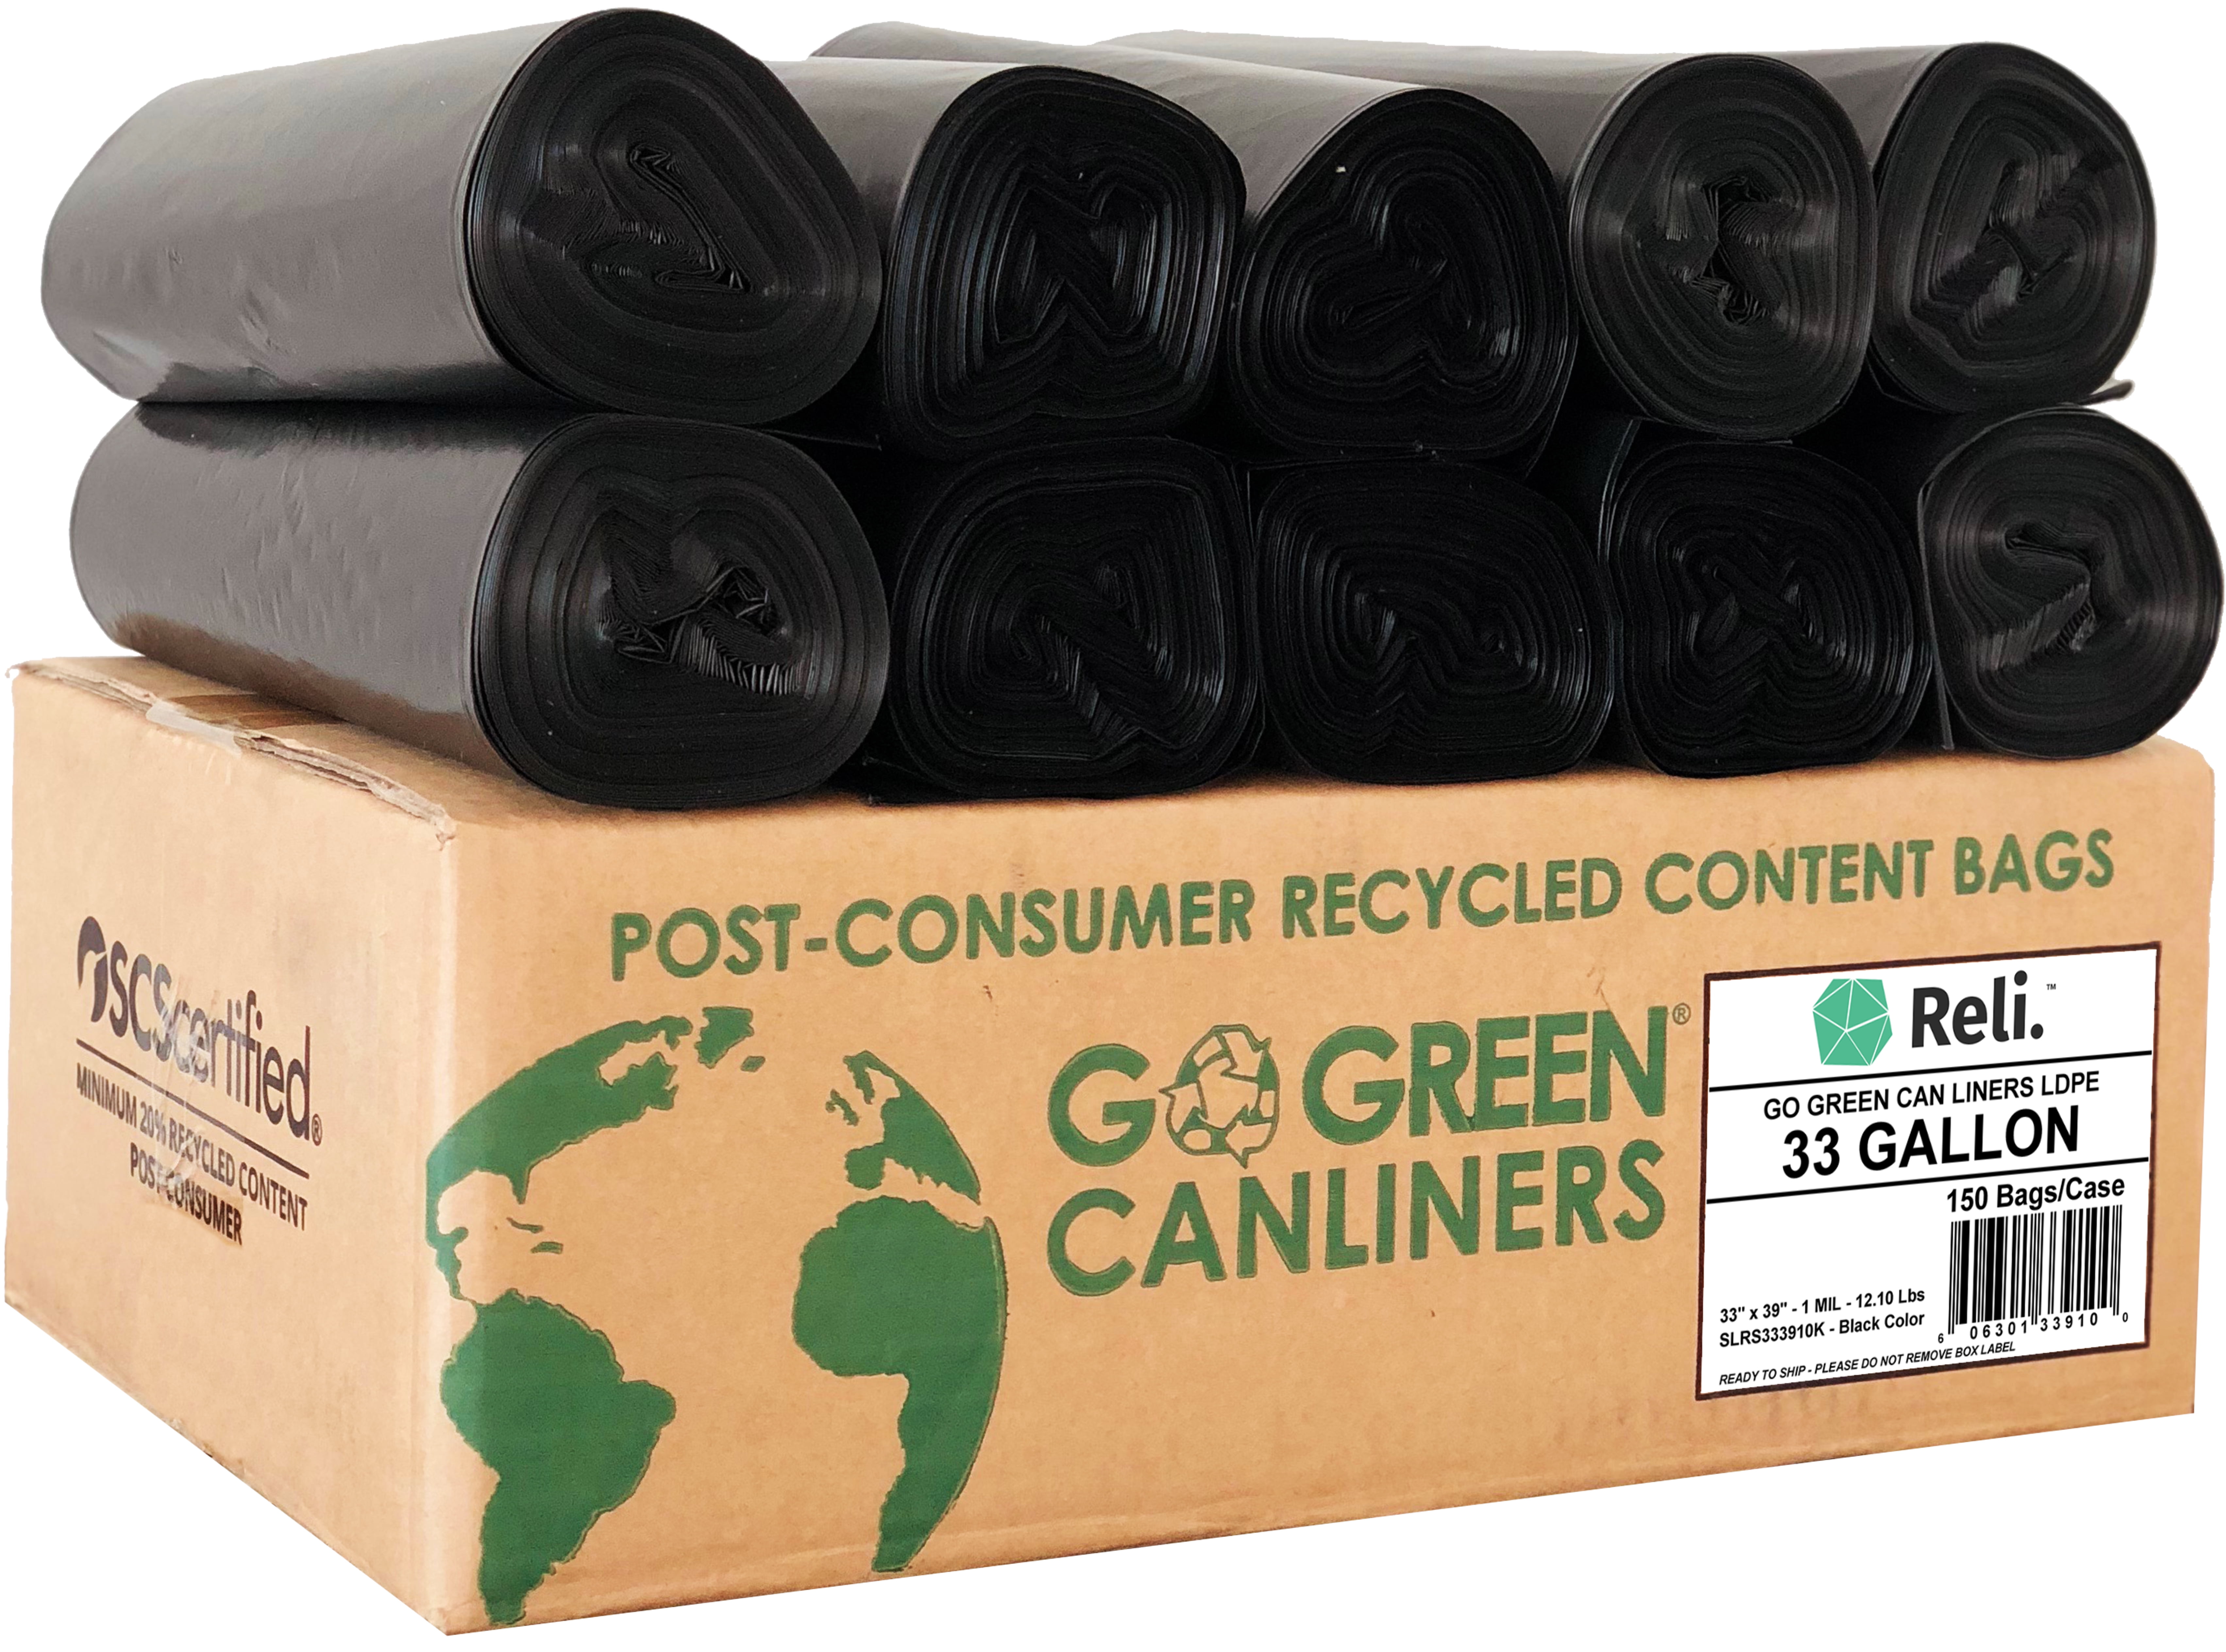 Eco-Friendly Recyclable EcoStrong 40-45 Gallon Trash Bags 90 Count Reli 